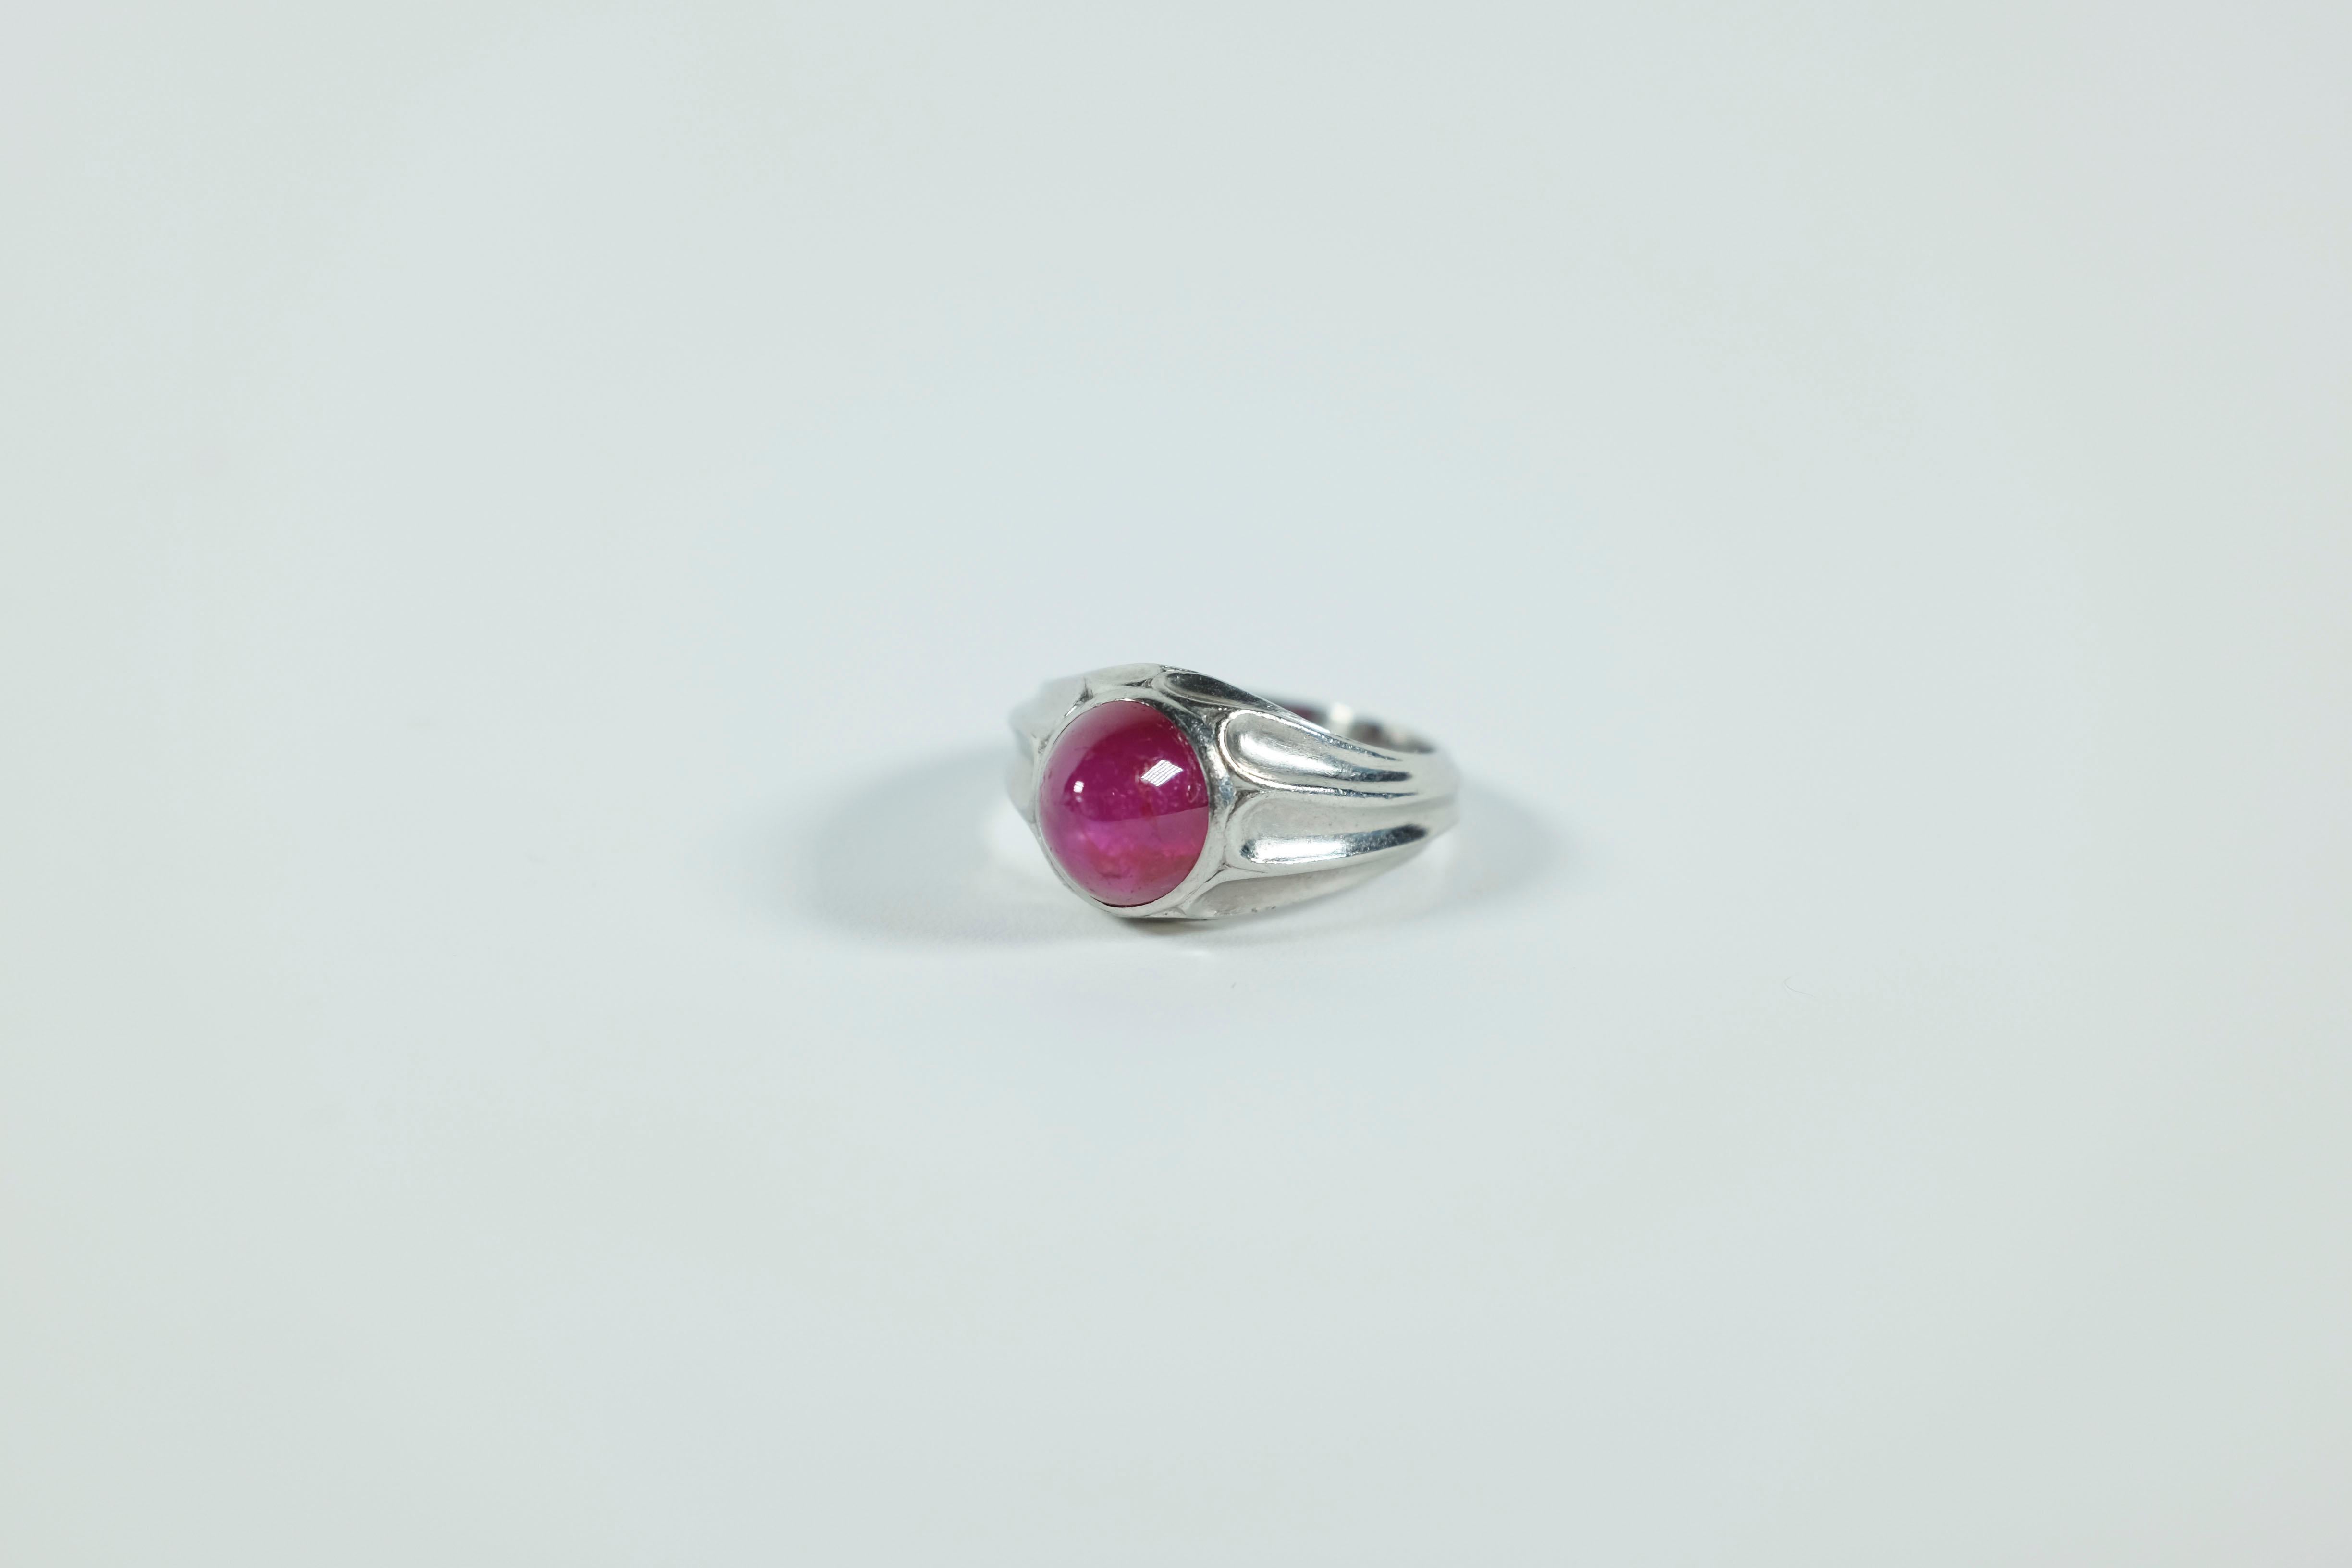 Estimated 2.00 carat Cabochon Star Ruby mounted in it's original Art Deco era Tiffany and Co ring.  Hand carved platinum, over 100 years old.  The star is diffused, but this ring...  wow.  